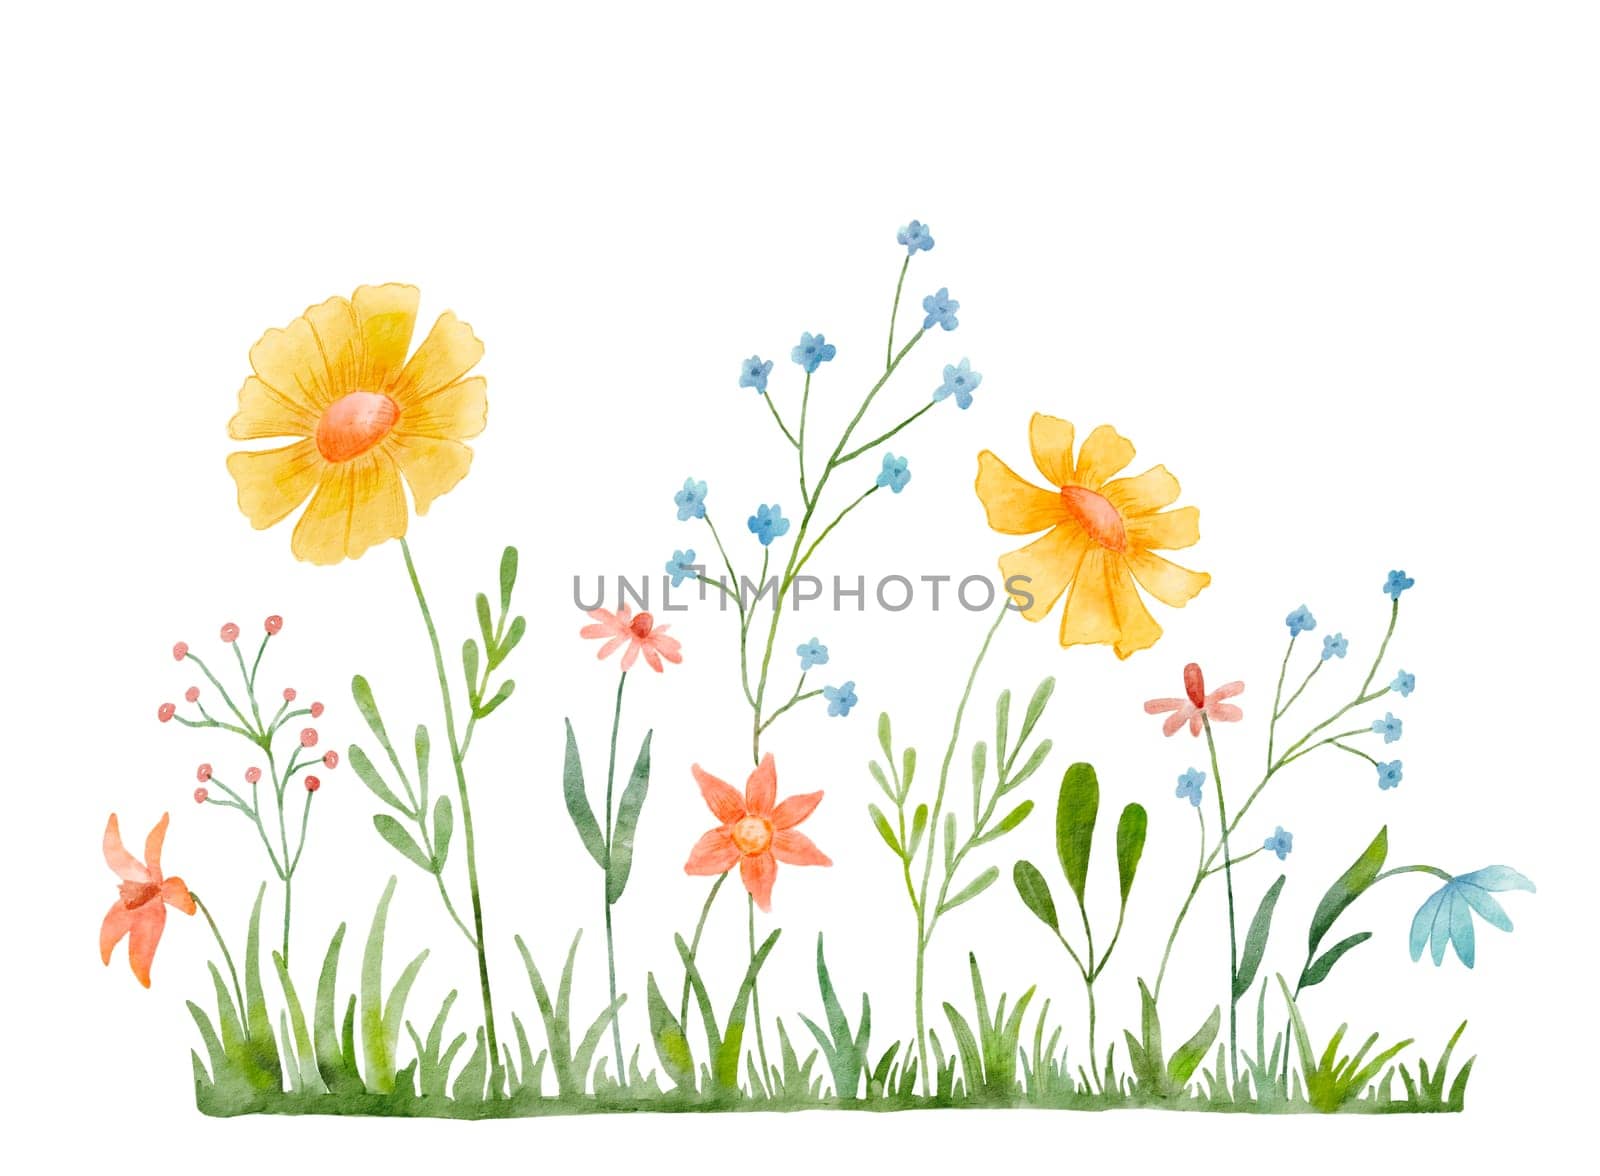 Watercolor wild herbs and flowers illustration. Hand painted meadow with grass and wildflowers isolated on white background